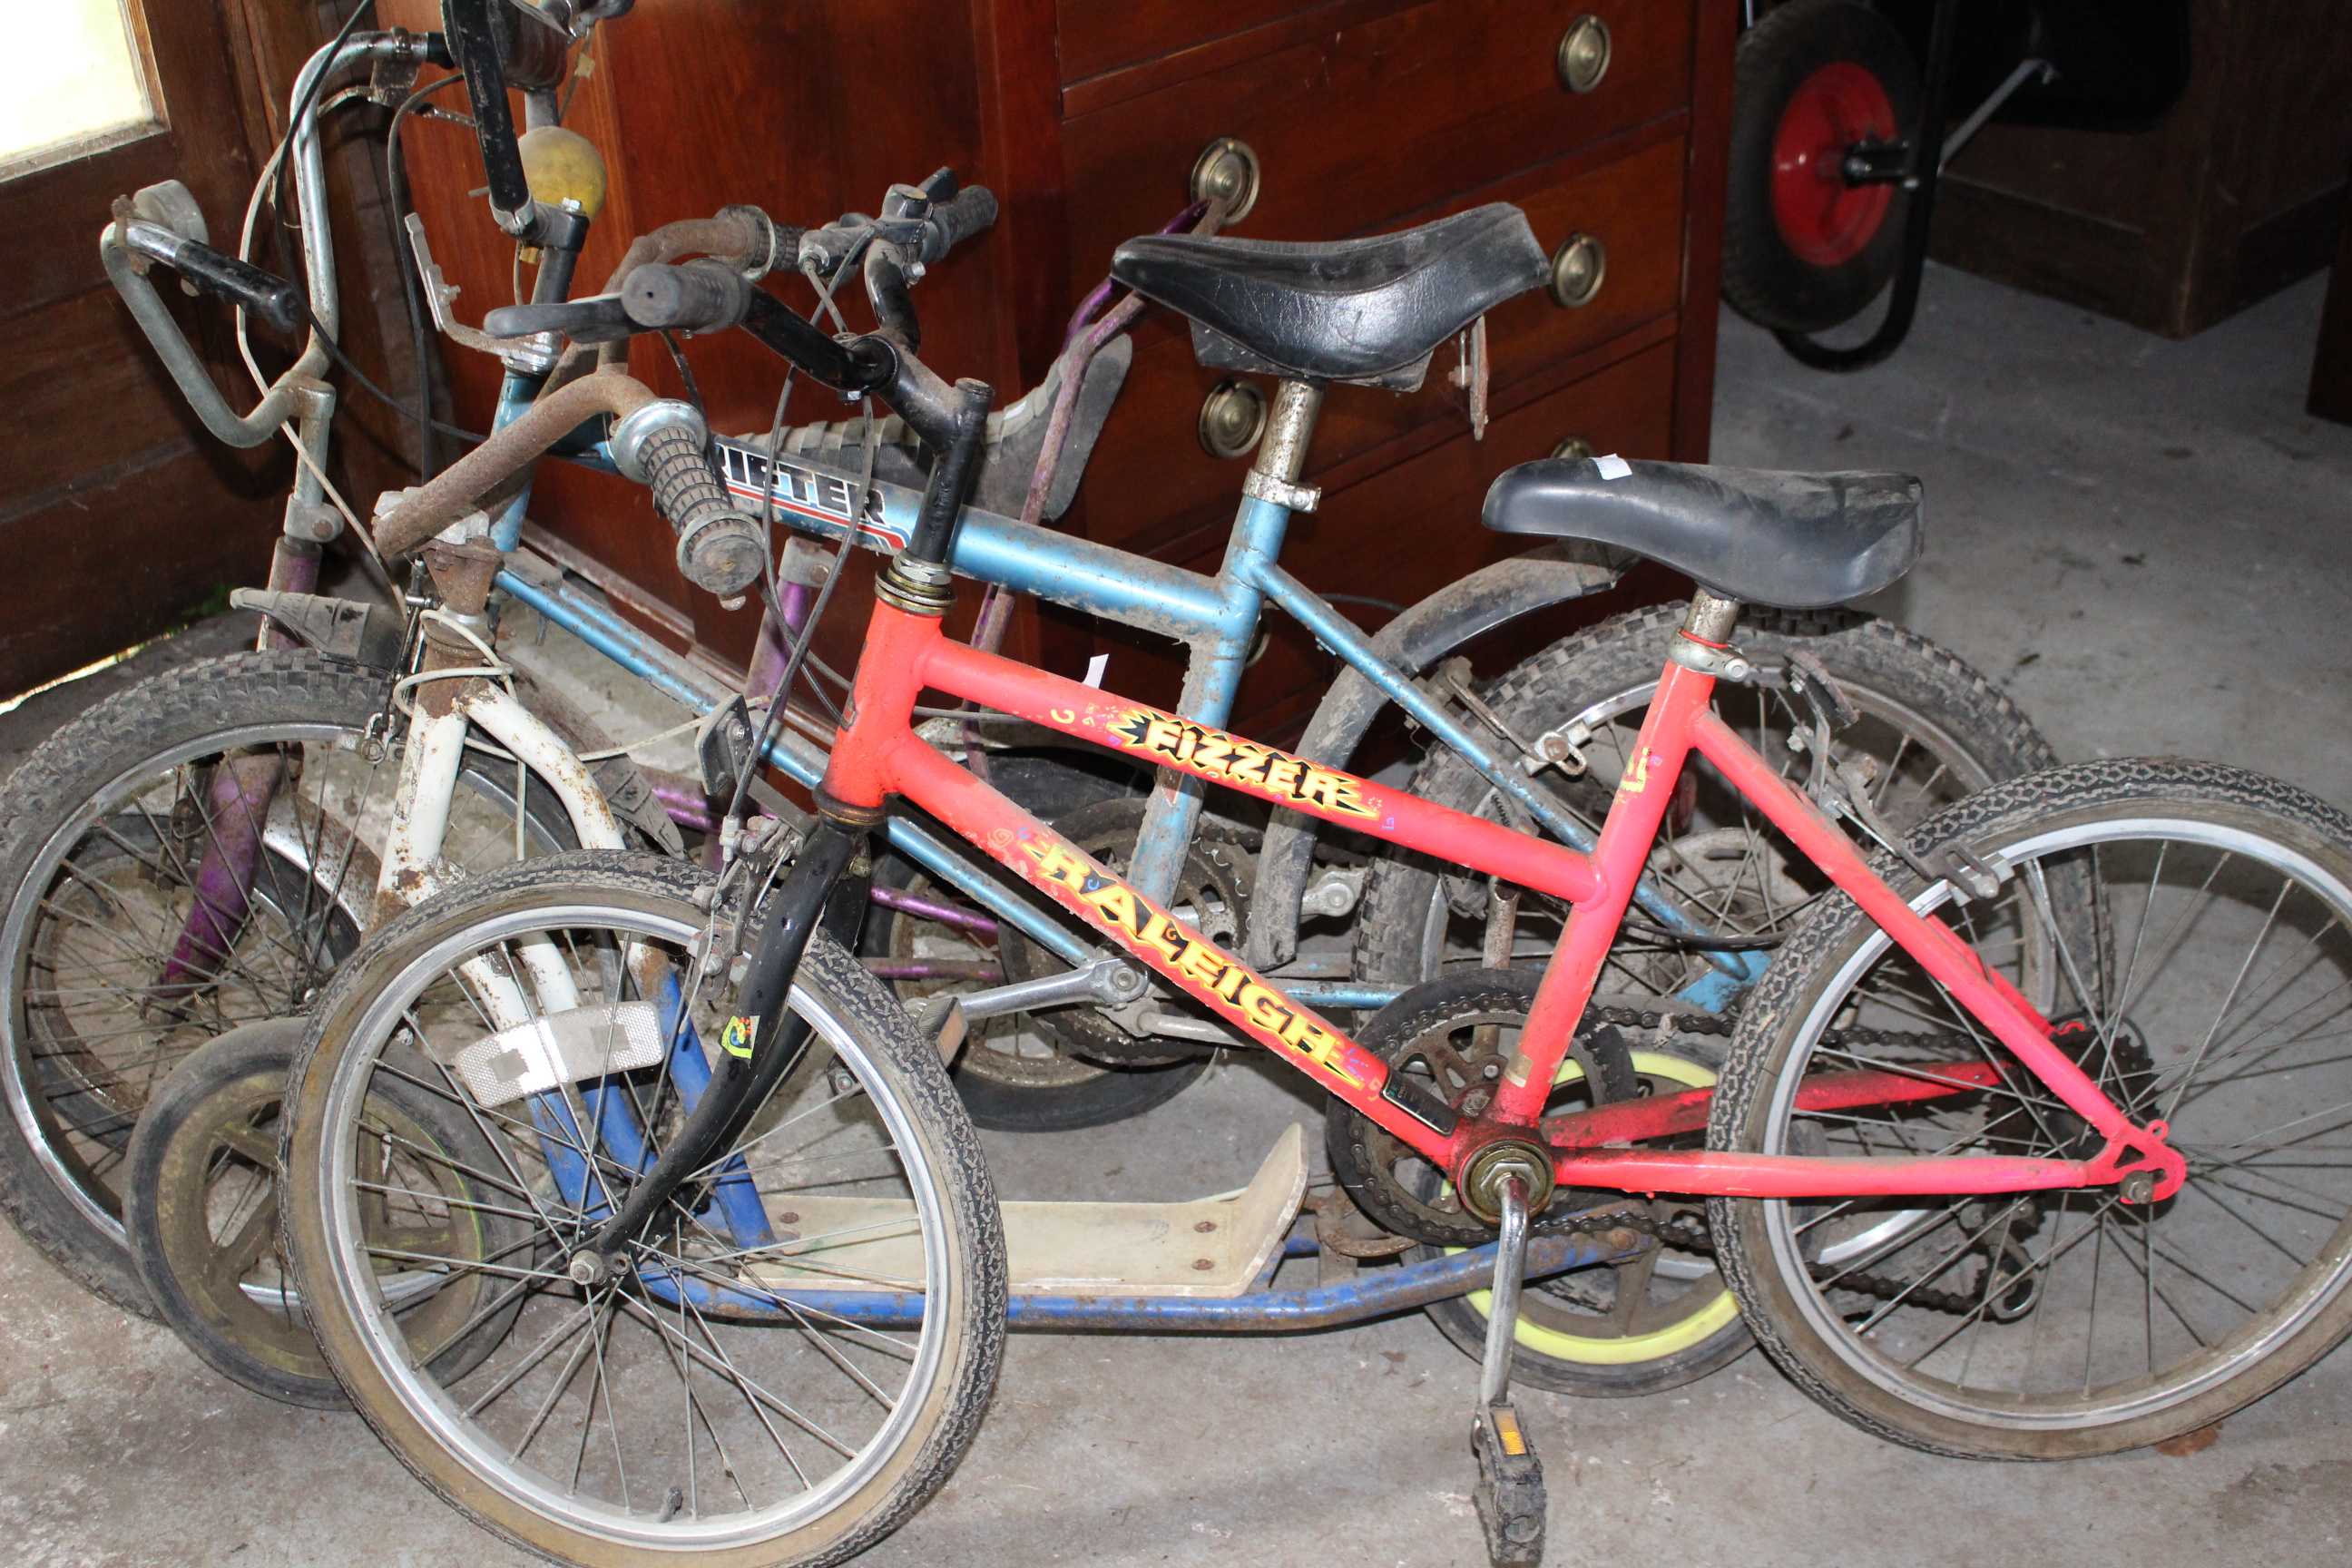 3 x Vintage Childrens pushbikes and 1 x Childrens scooter, to include 1 x Raleigh Budgie and 1 x - Image 3 of 5